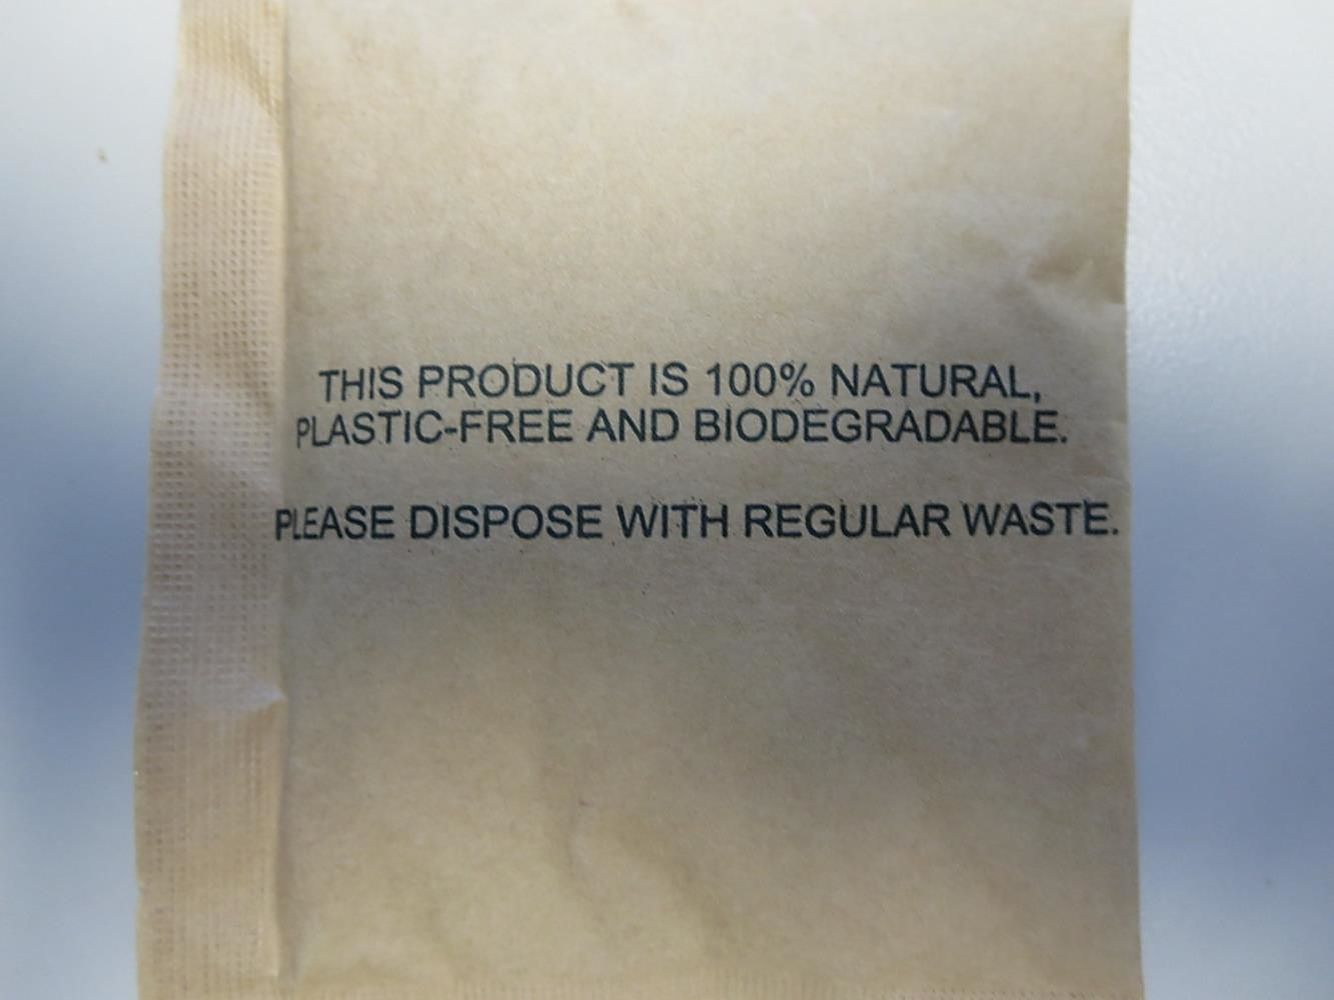 Micro-Pak® Dri Clay® Kraft All-Natural 66 Gram Clay Desiccant Packet is Biodegradable in Landfill and Outperforms Silica Gel & Calcium Chloride Moisture Absorbers